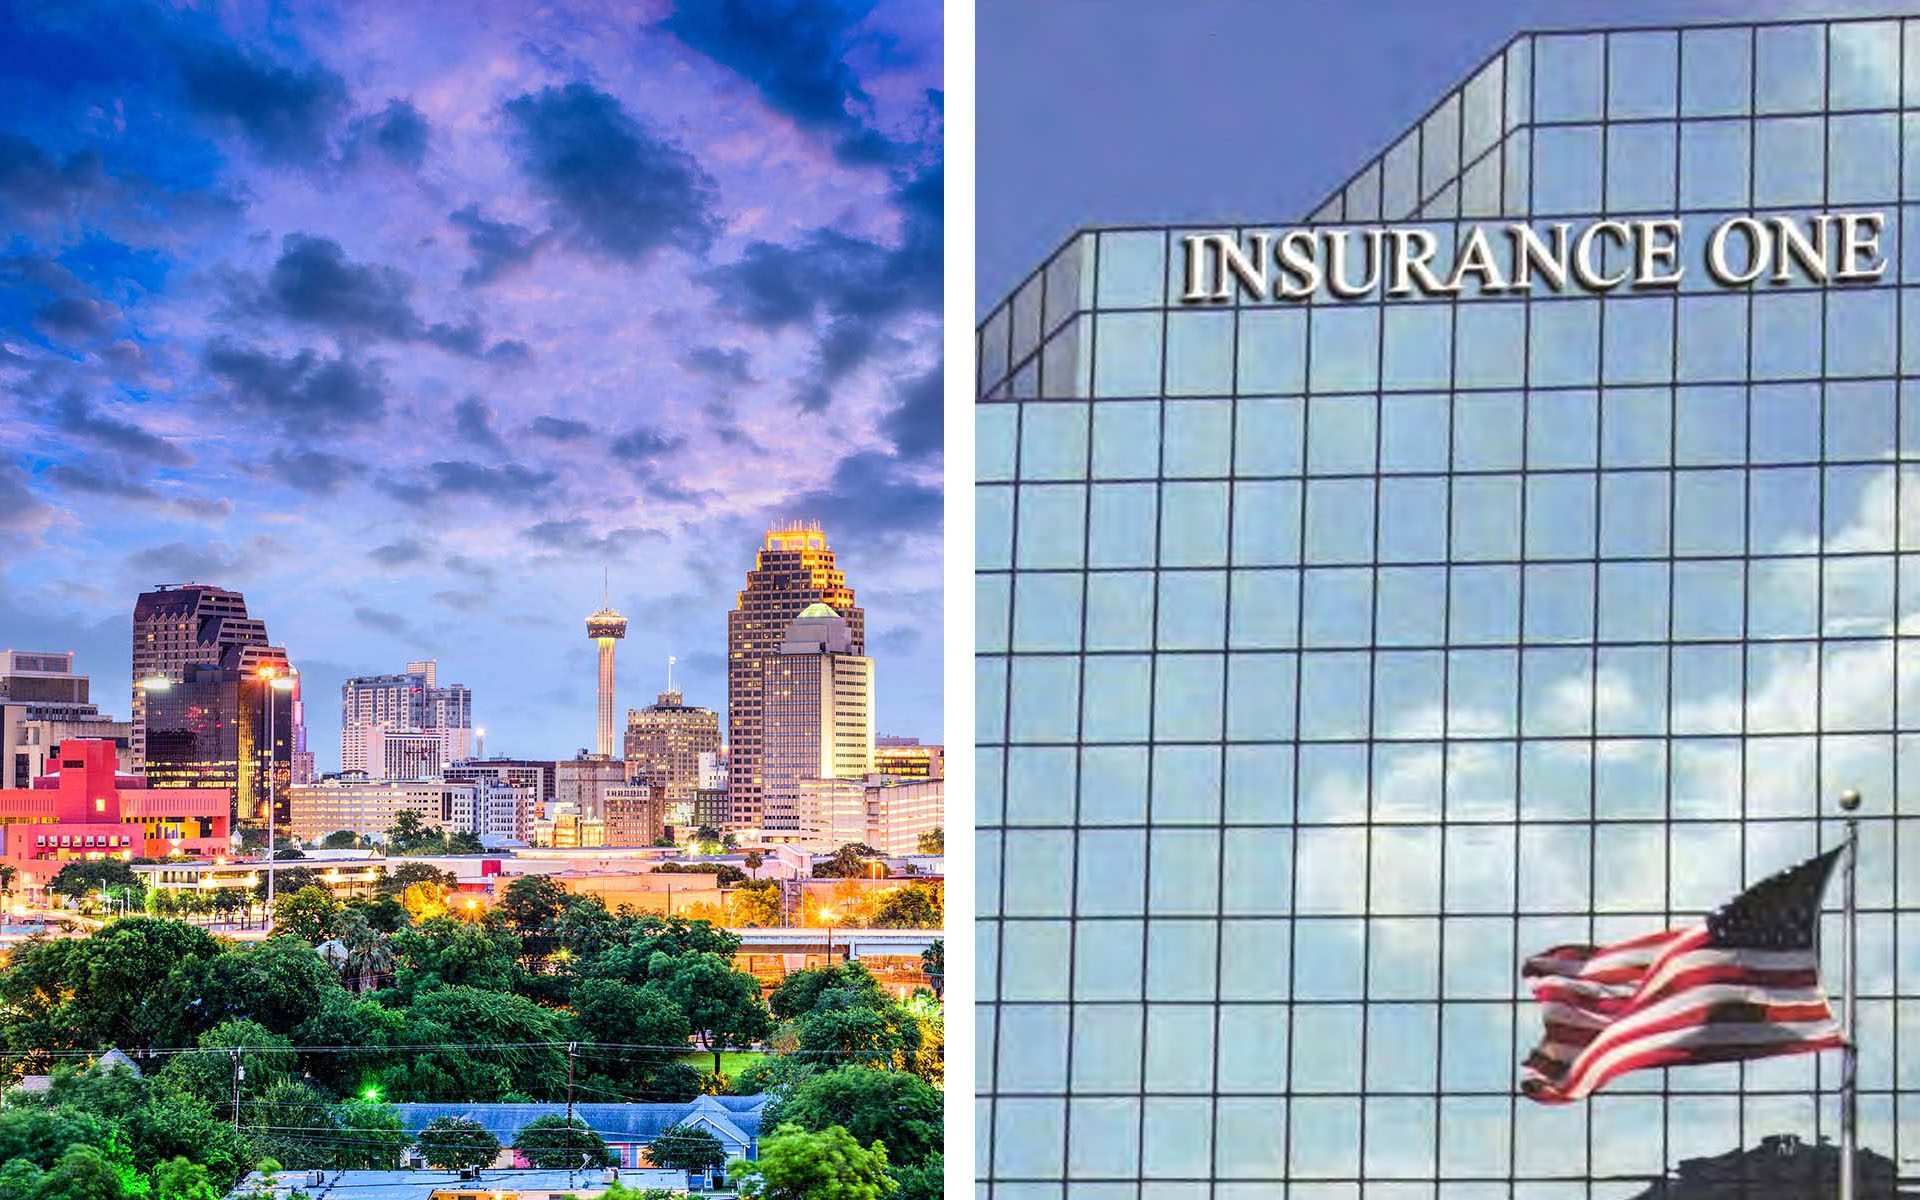 Homepage - Split Screen of San Antonio Texas Skyline During Sunset with Insurance One Building